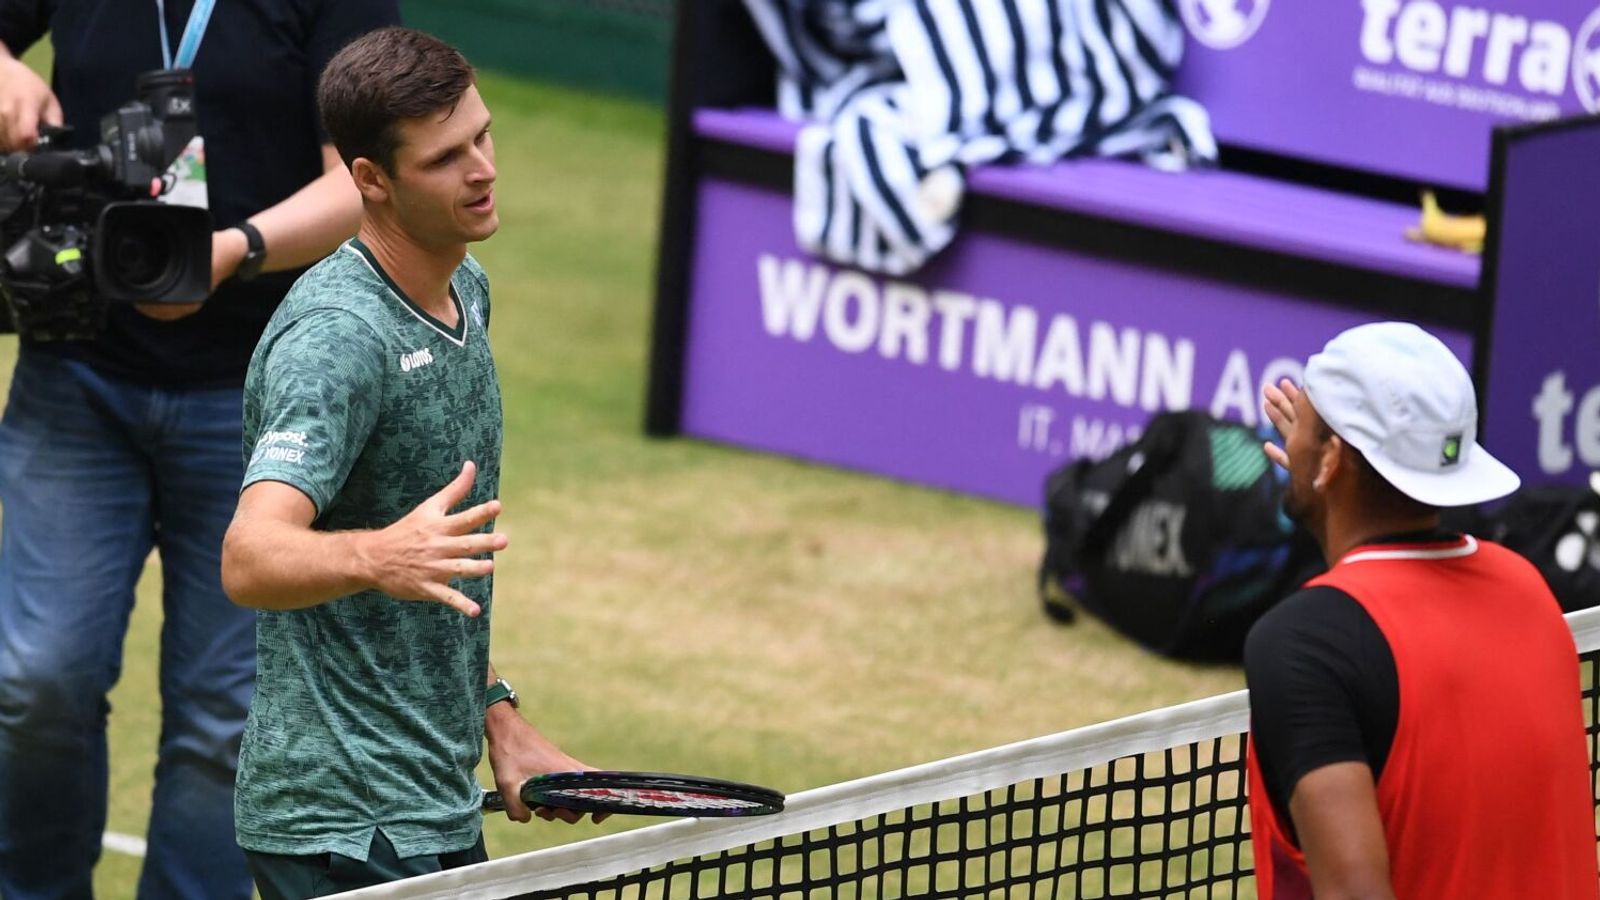 Hubert Hurkacz beats Nick Kyrgios to reach Halle Open final while Matteo Berrettini breezes into Queen’s final to keep title defence on track